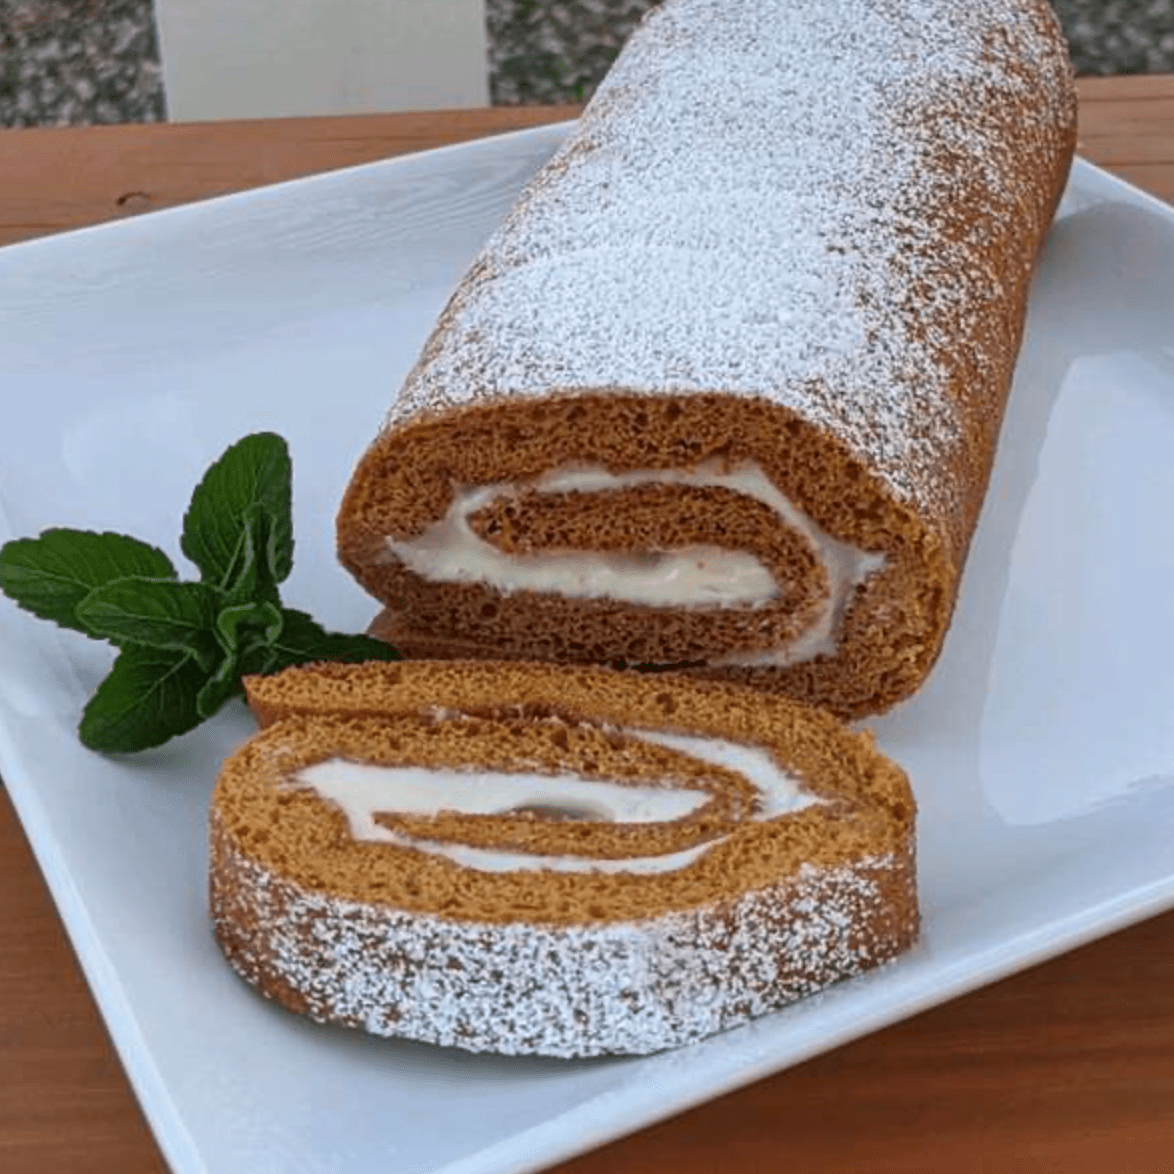 pumpkin roll on square white plate with mint garnish